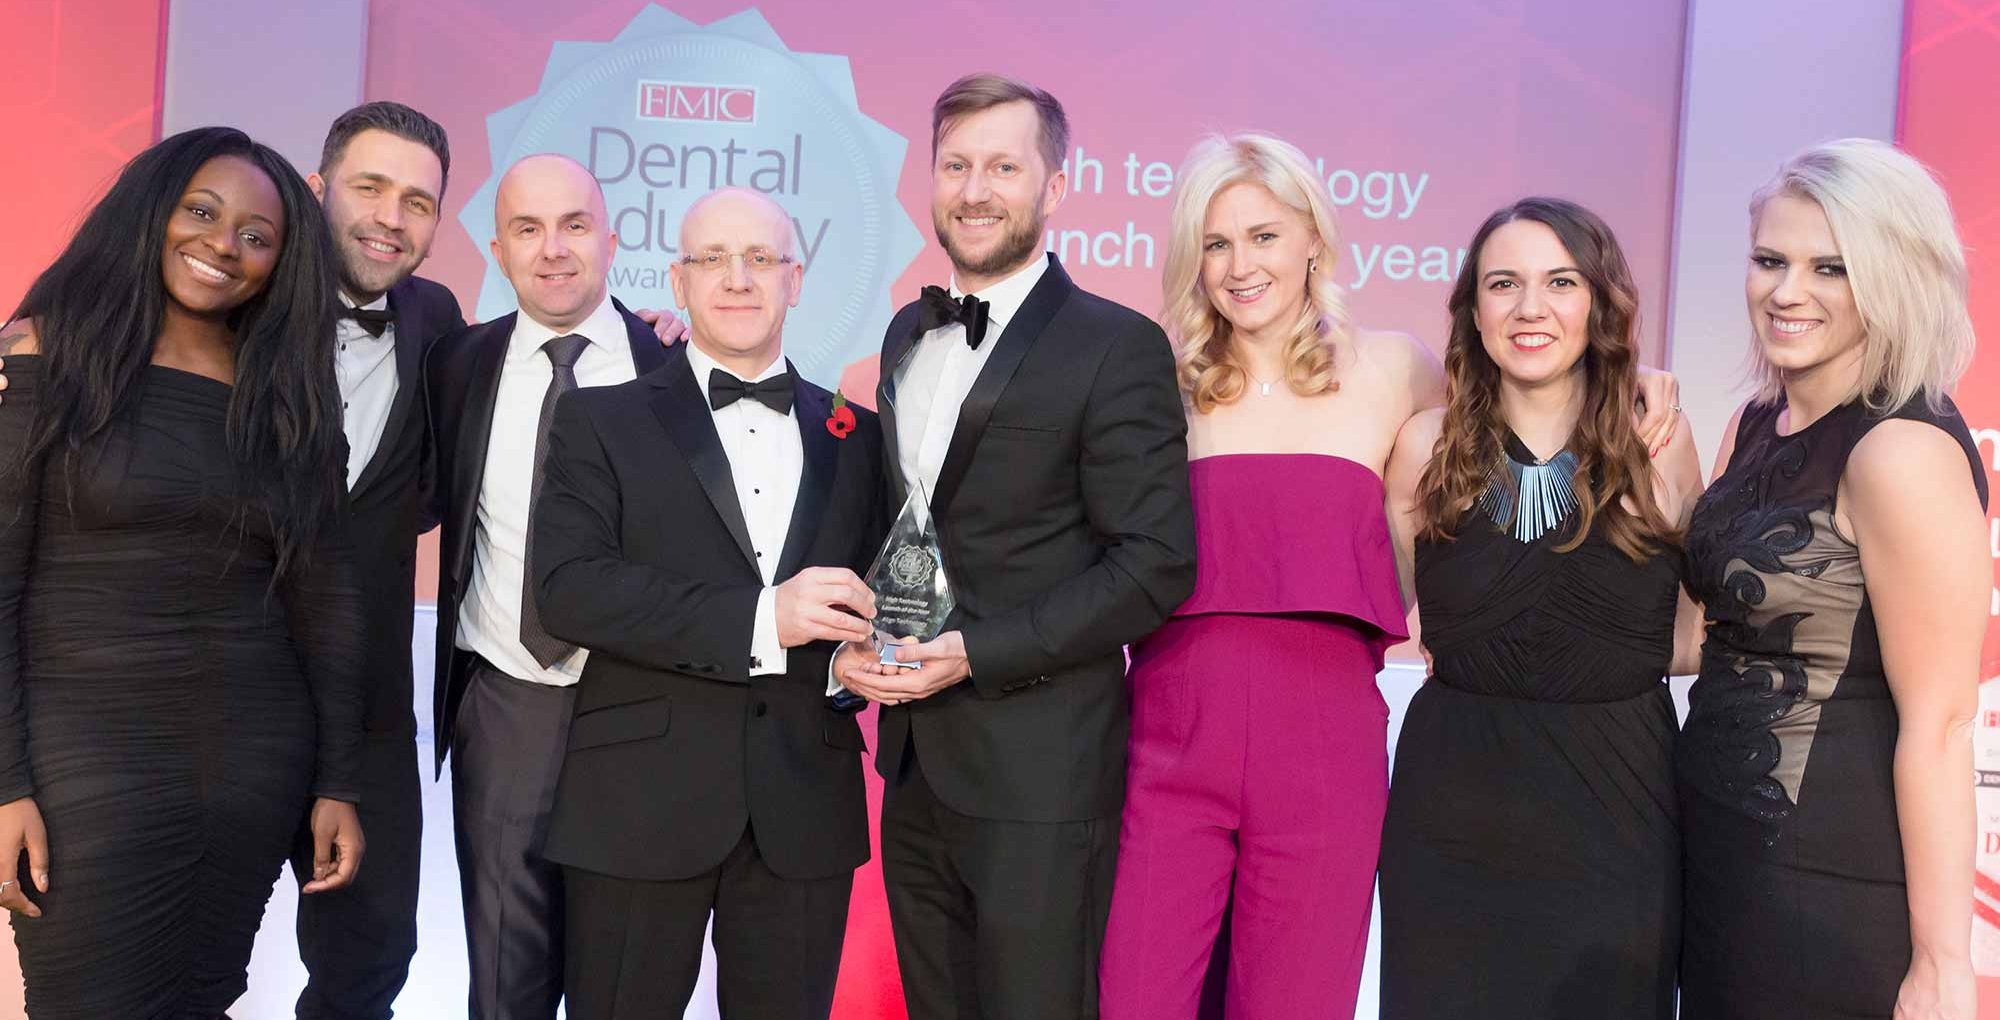 Dental Industry Awards 2019 High Technology Launch of the Year